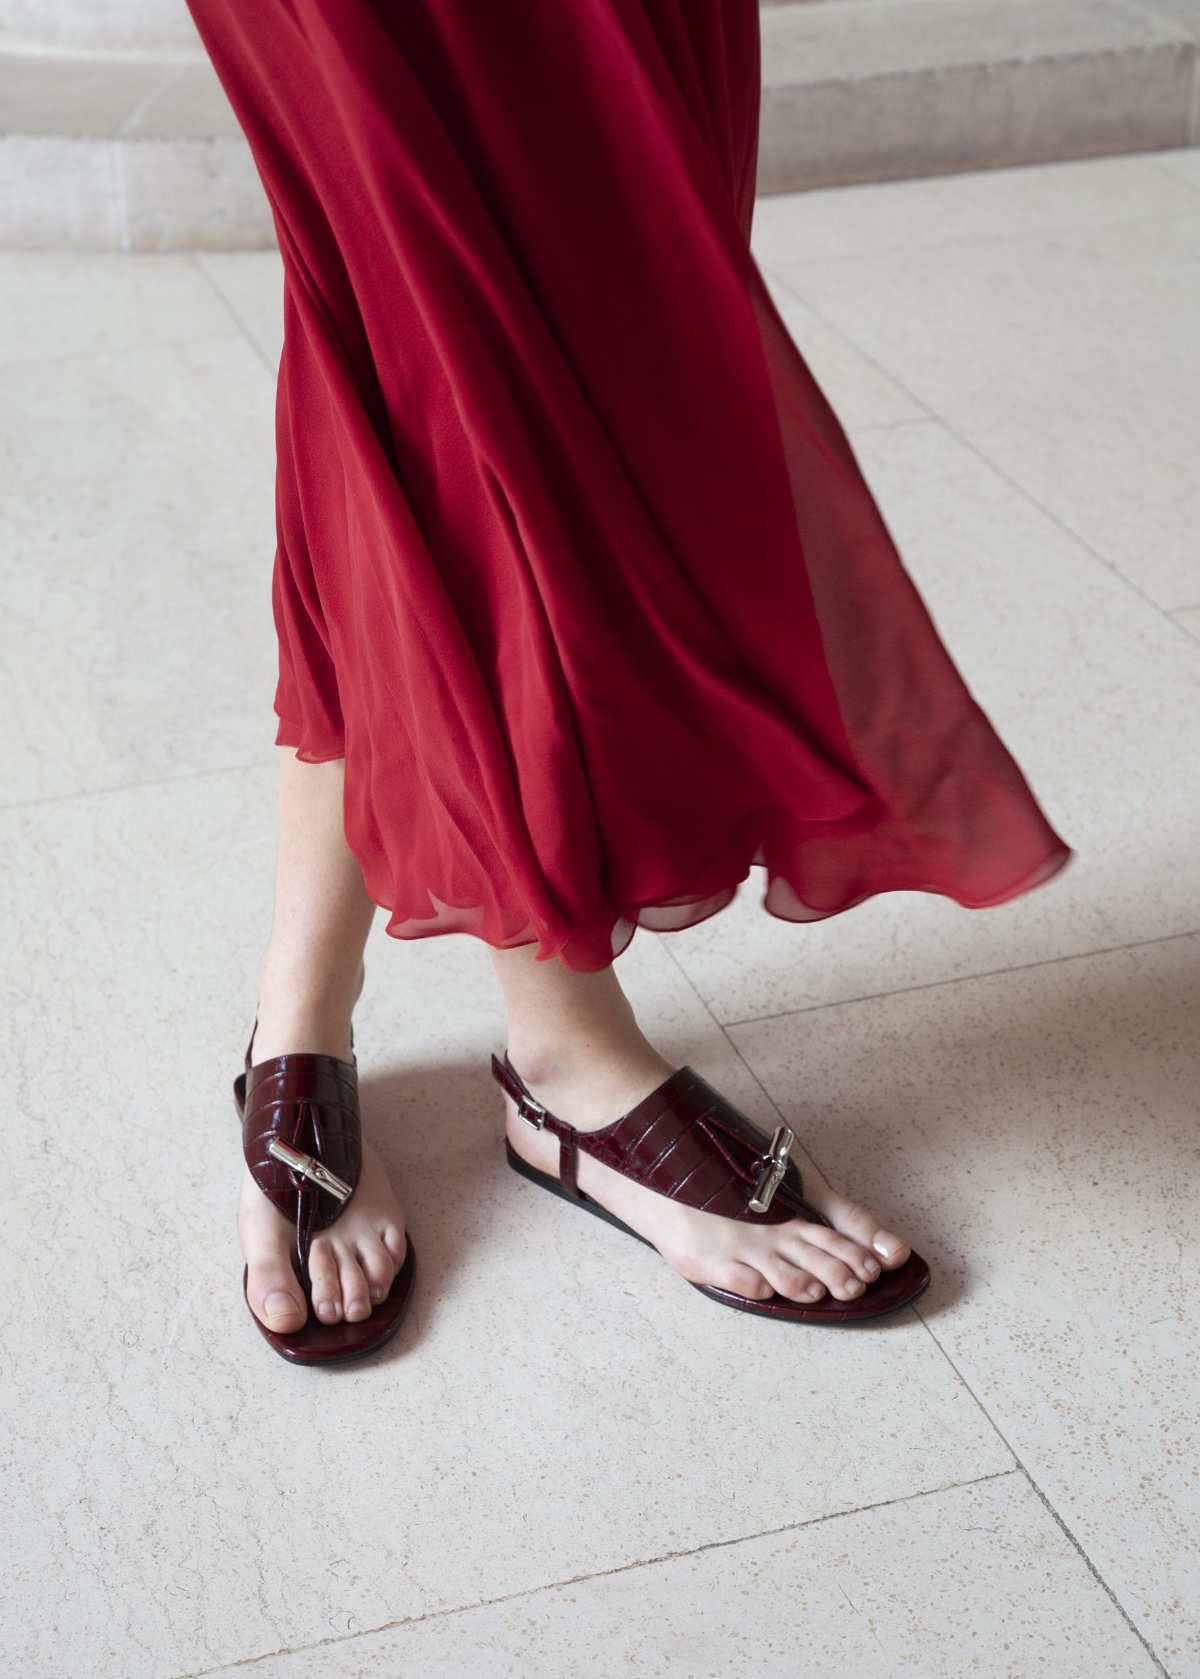 New Longchamp’s Collection of Flat Sandals Captures Energy of Summer